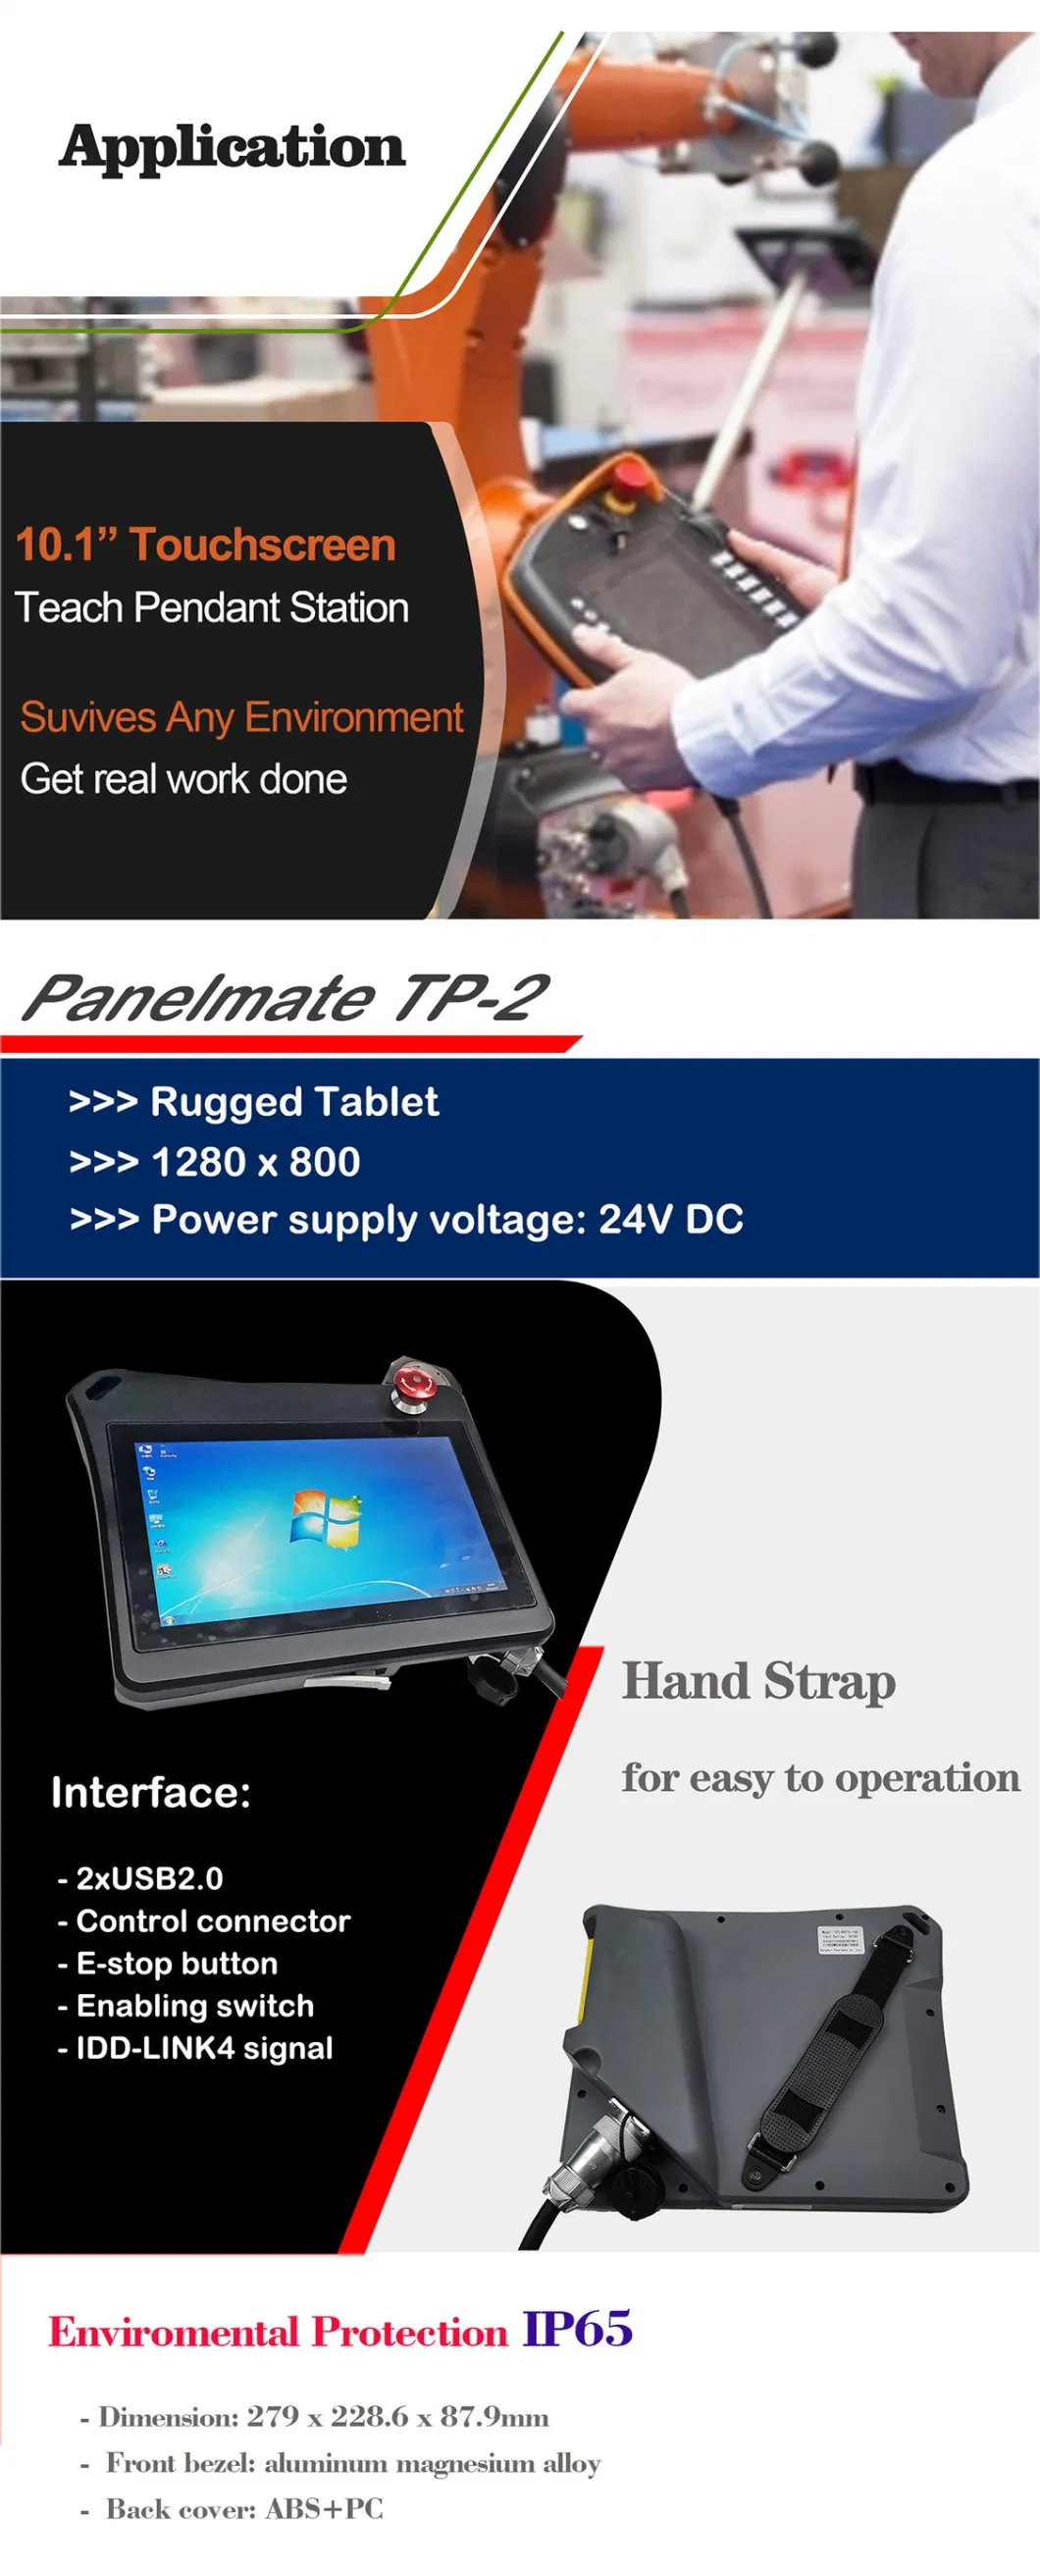 10.1 Inch Touch Teach Pendant Station IP65 Industrial Touchscreen Monitor CNC Control Panel RJ45 Idd-Link4 HMI Teach Operating Pendent Station